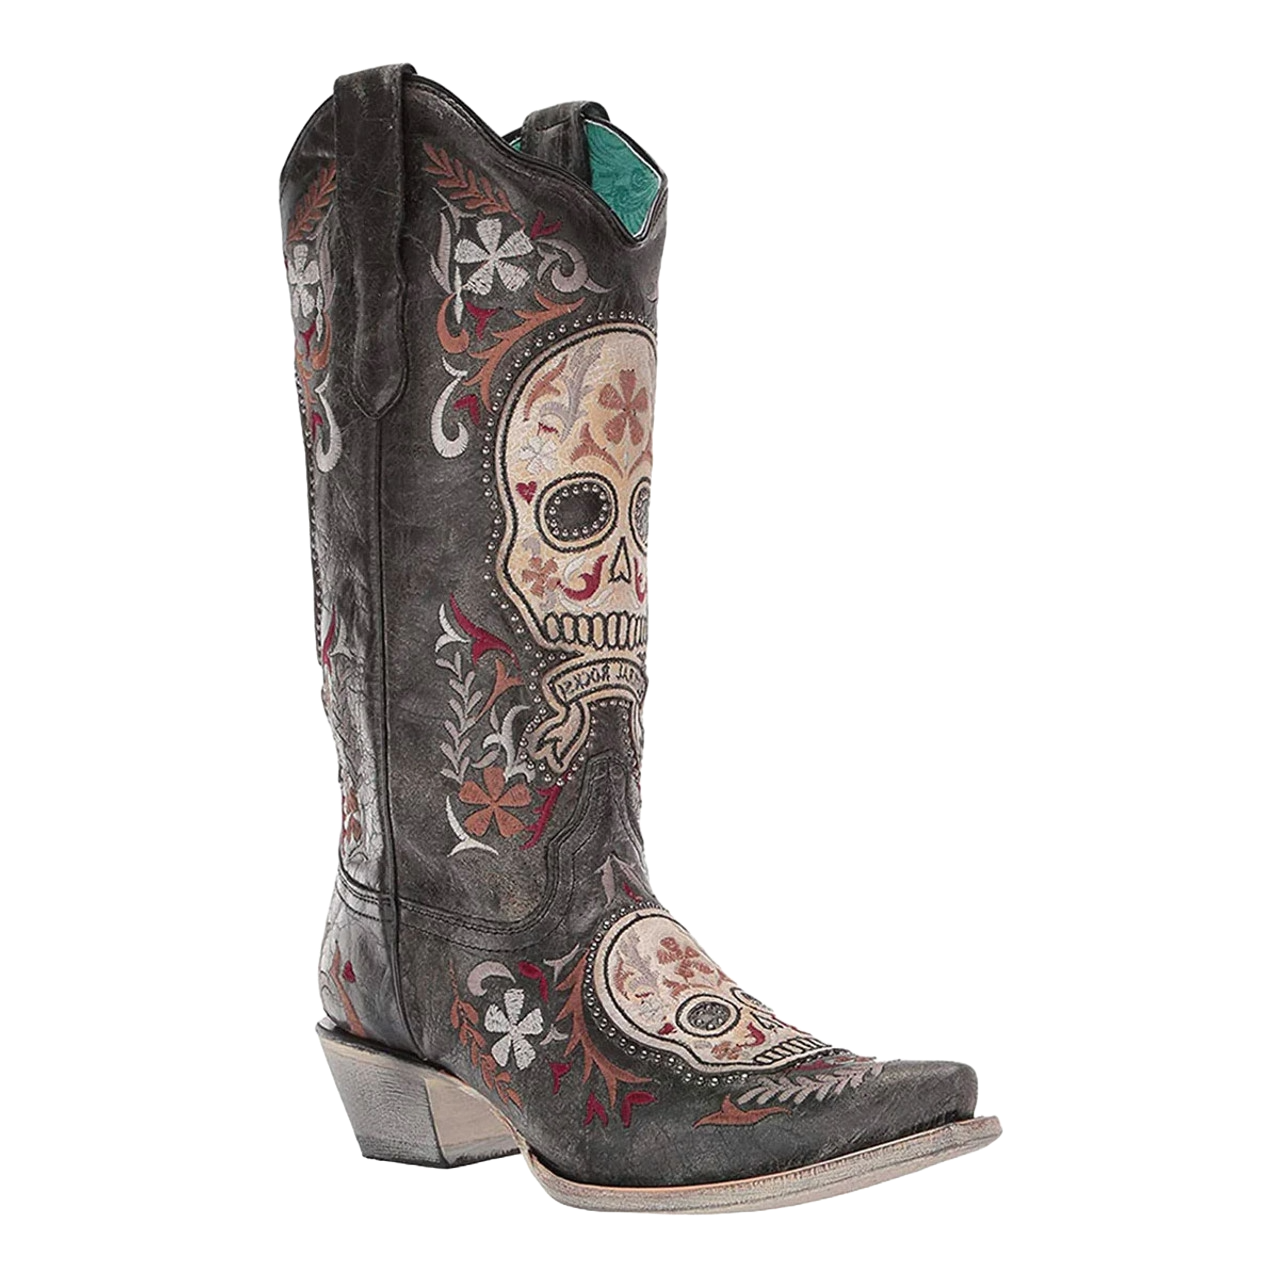 Corral Ladies Black Skull Overlay Embroidery & Studs Boots E1587